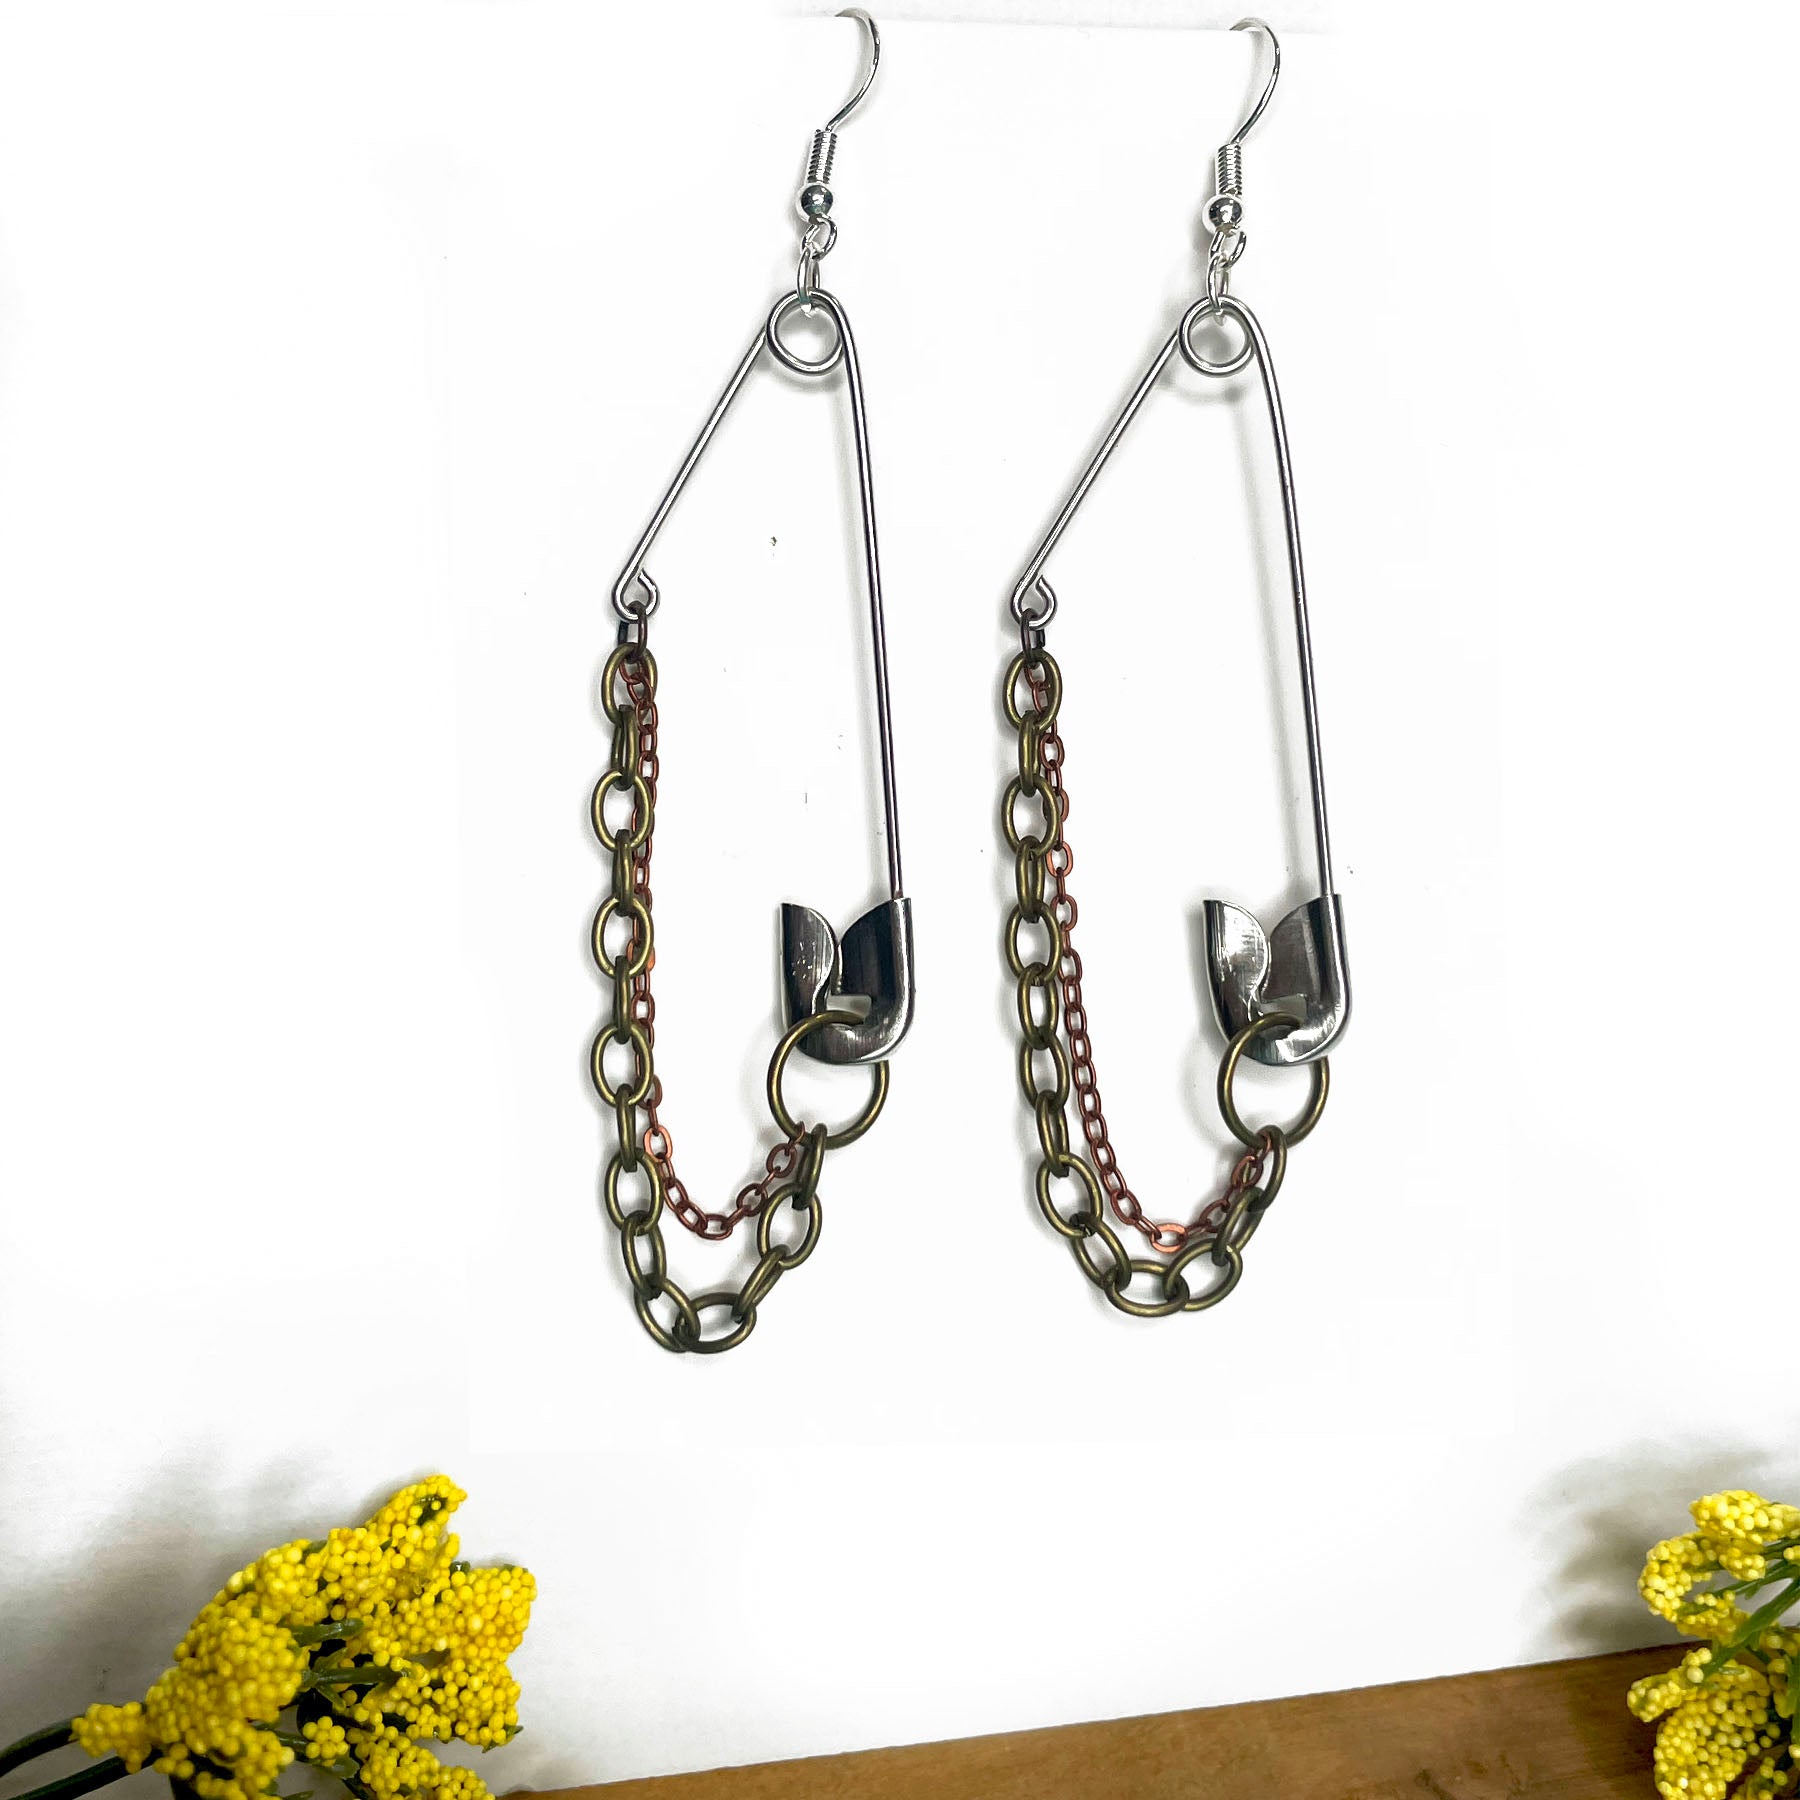 she-bang is upcycled handmade unique safety pin earrings, unique jewelry, made from recycled materials and chains, completely one of a kind jewelry made by local brooklyn designers.